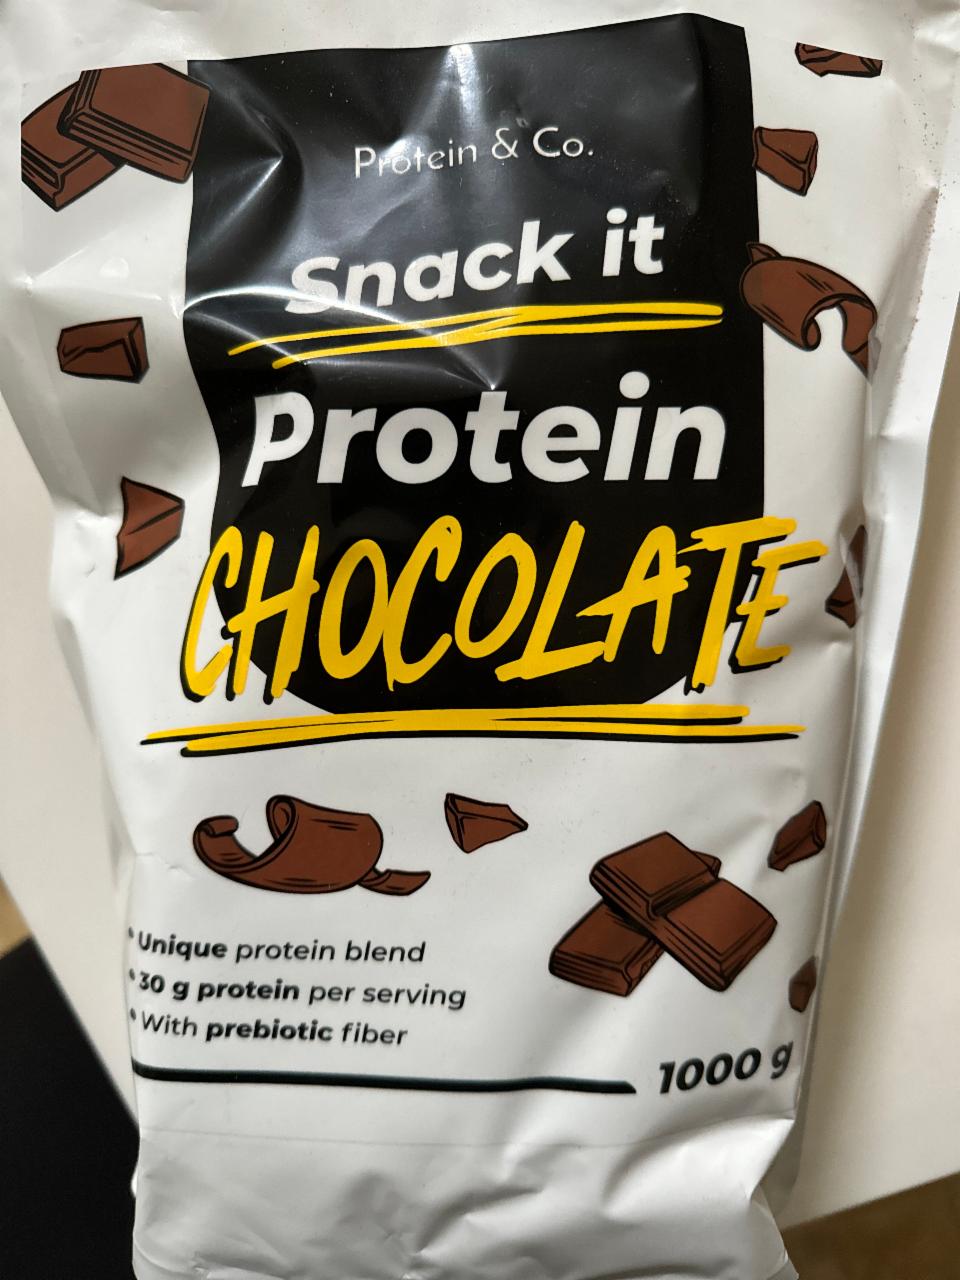 Fotografie - Snack it Protein chocolate Protein & Co.